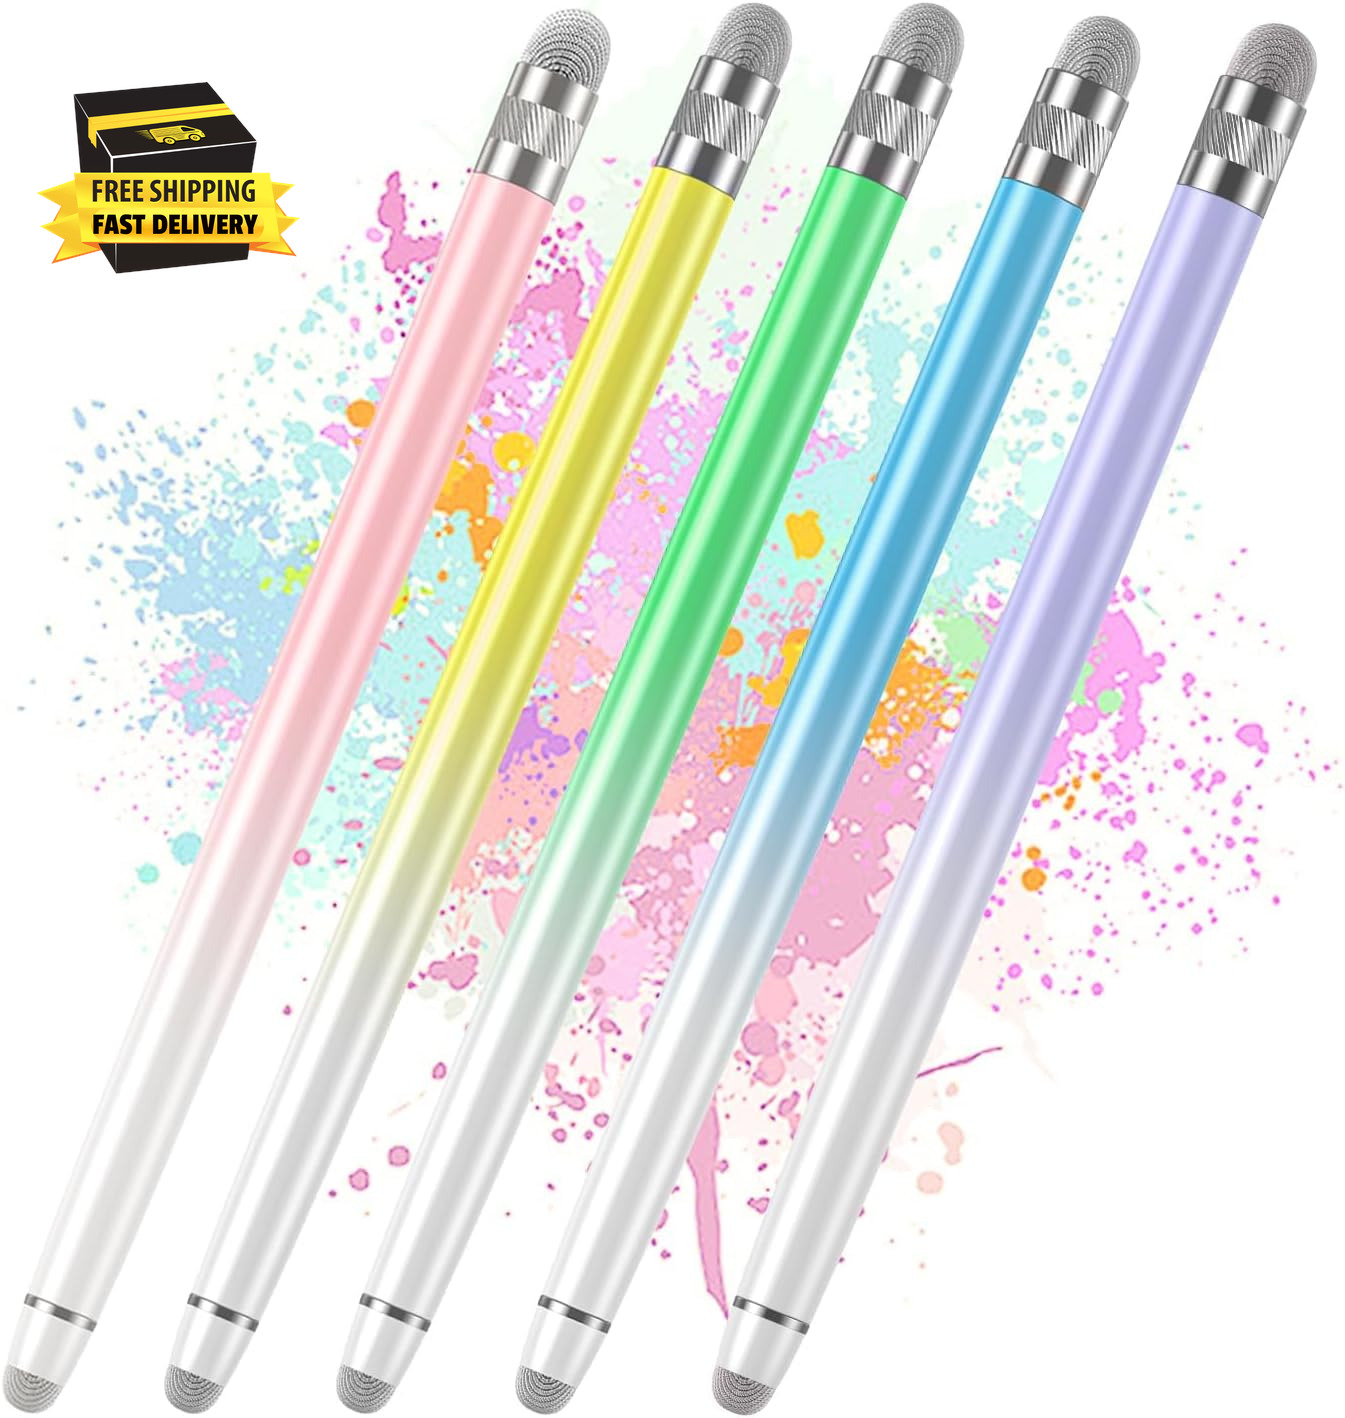 5PCS Stylus Pens for Touch Screens, Stylus Pen for Iphone/Ipad/Tablet Android/Mi